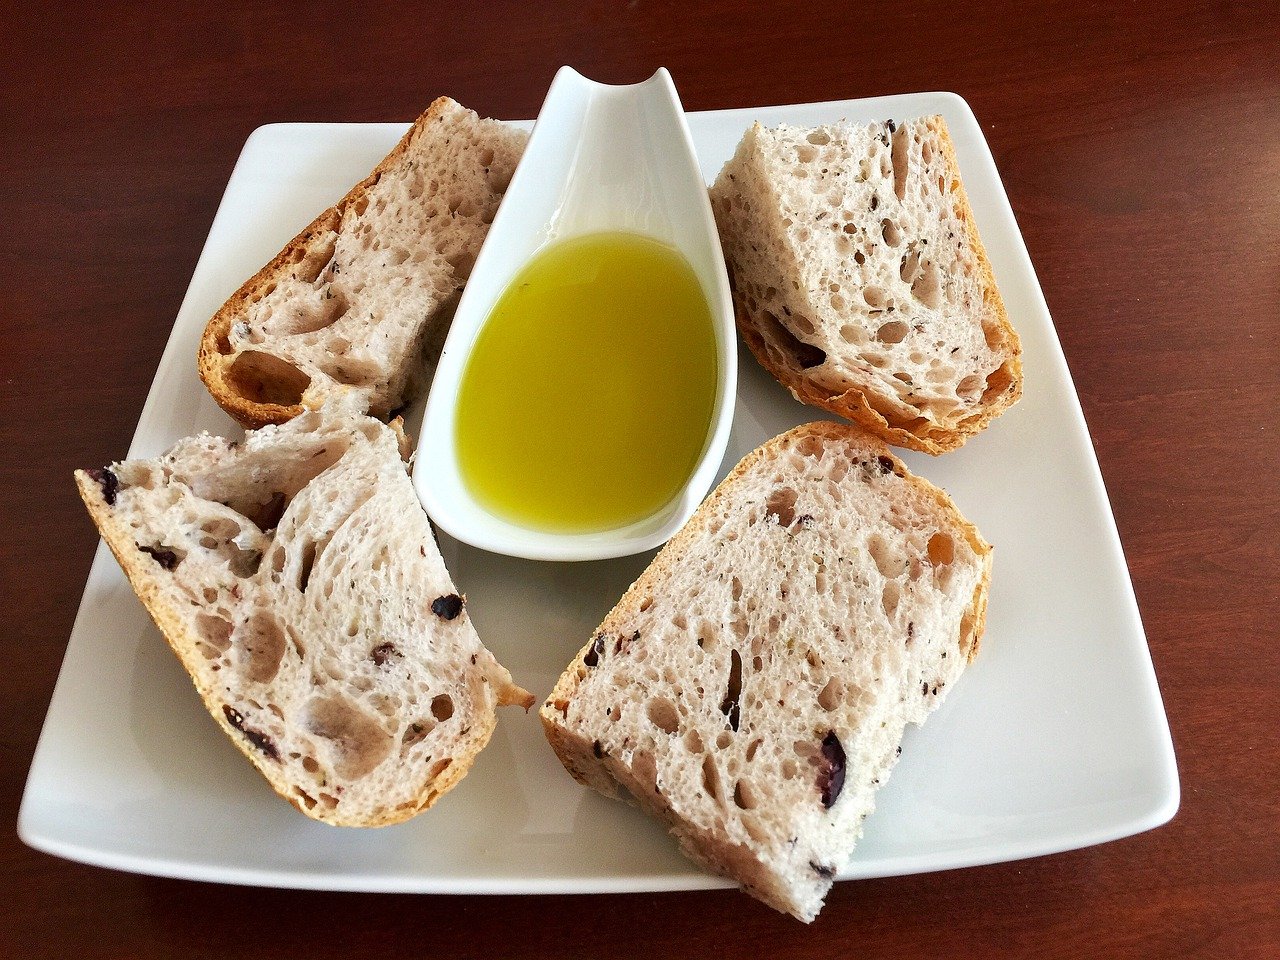 olive oil dipping sauce recipe for bread